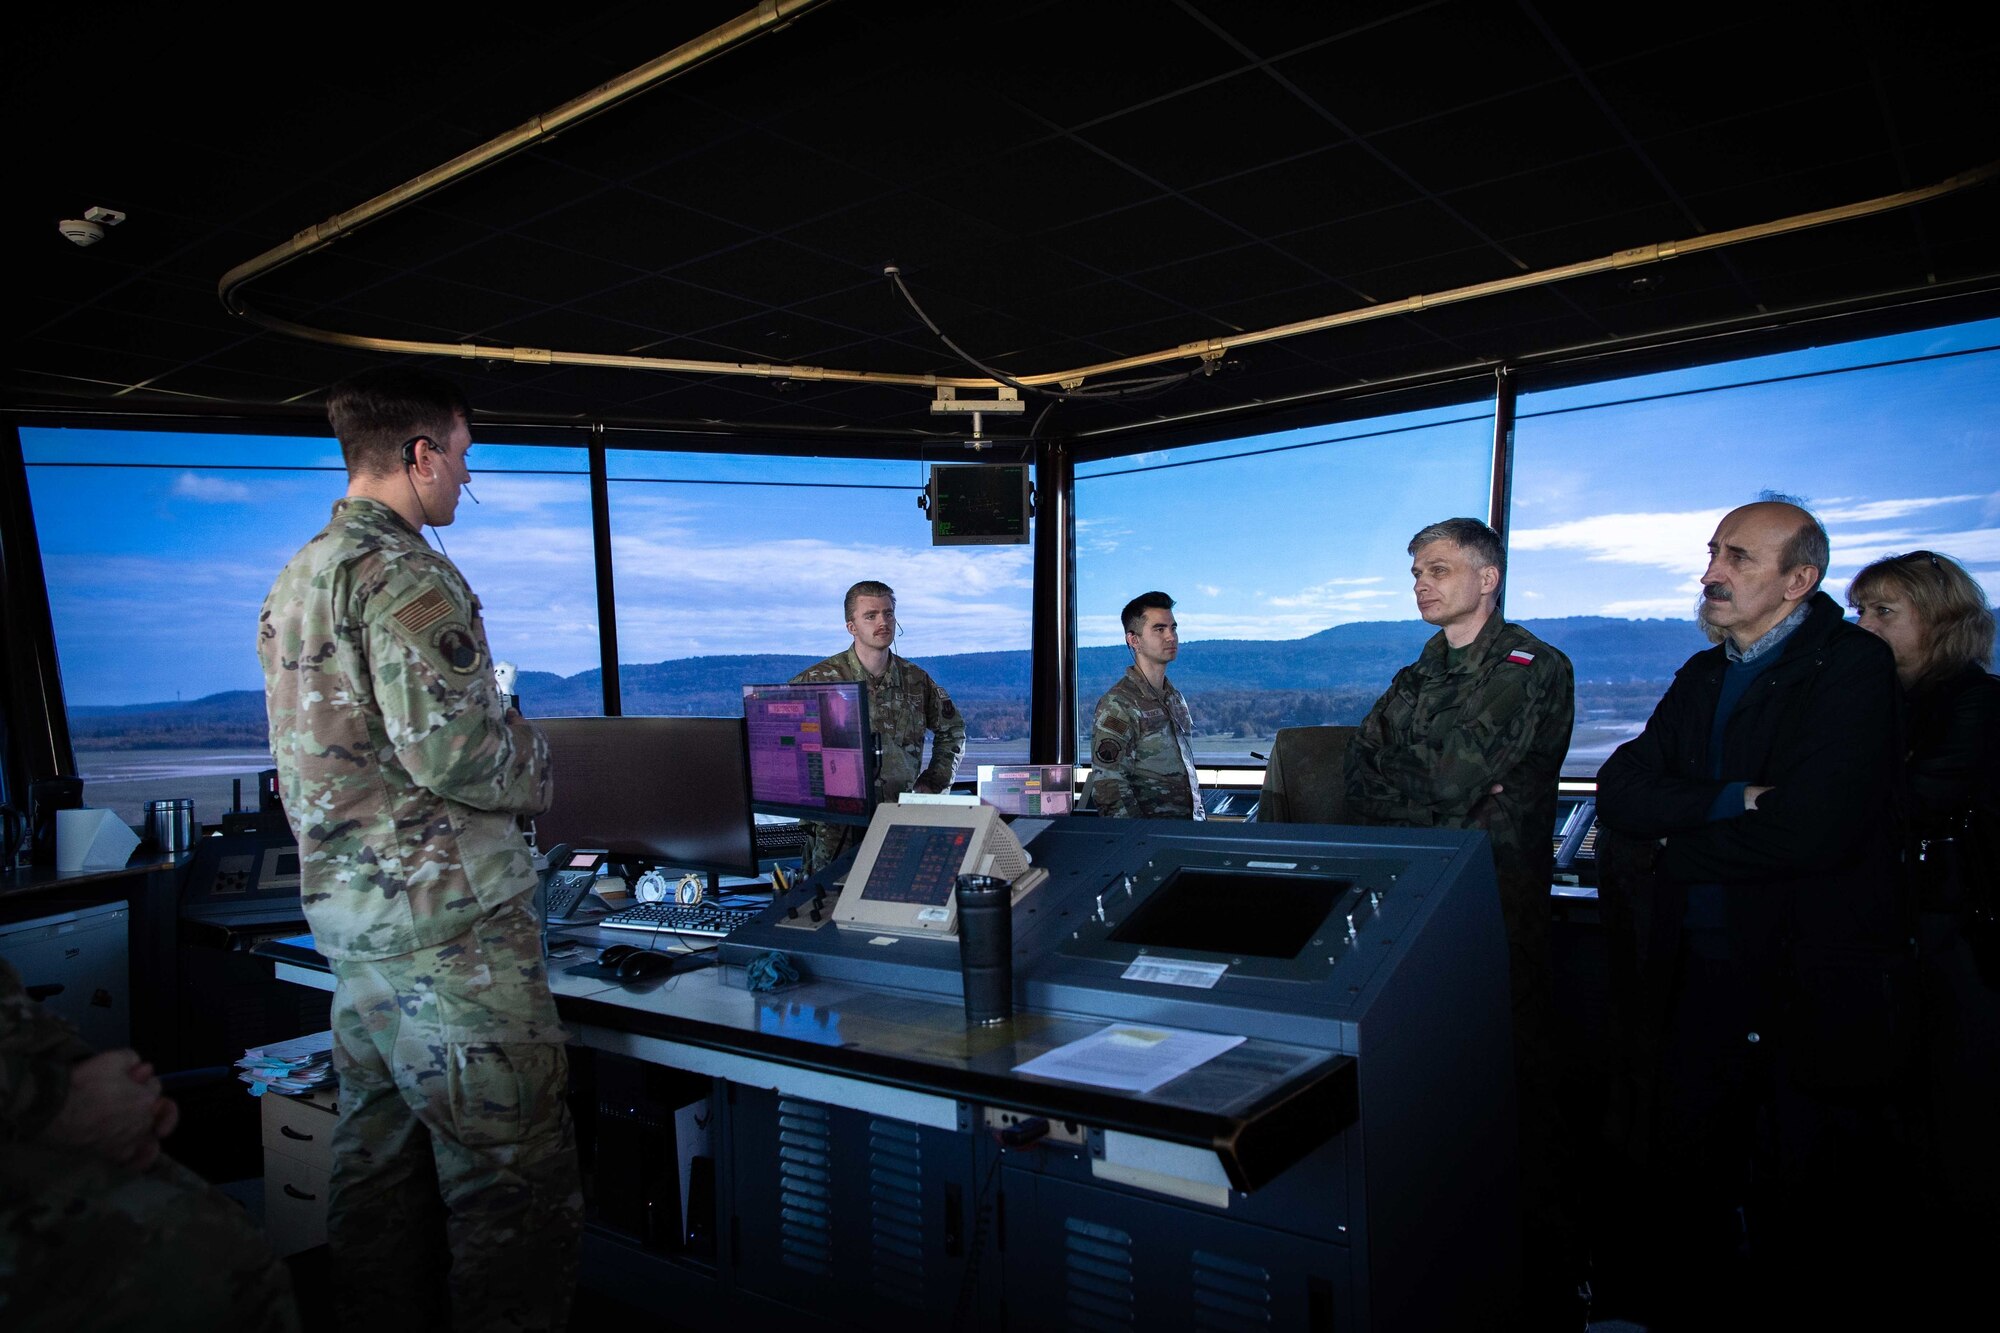 U.S. Air Force Staff Sgt. Derek Schafer, left, 86th Operation Support Squadron air traffic controller, provides an overview of the watch tower facility, equipment and capabilities to Polish air force leaders at Ramstein Air Base, Germany, Oct. 27, 2022.